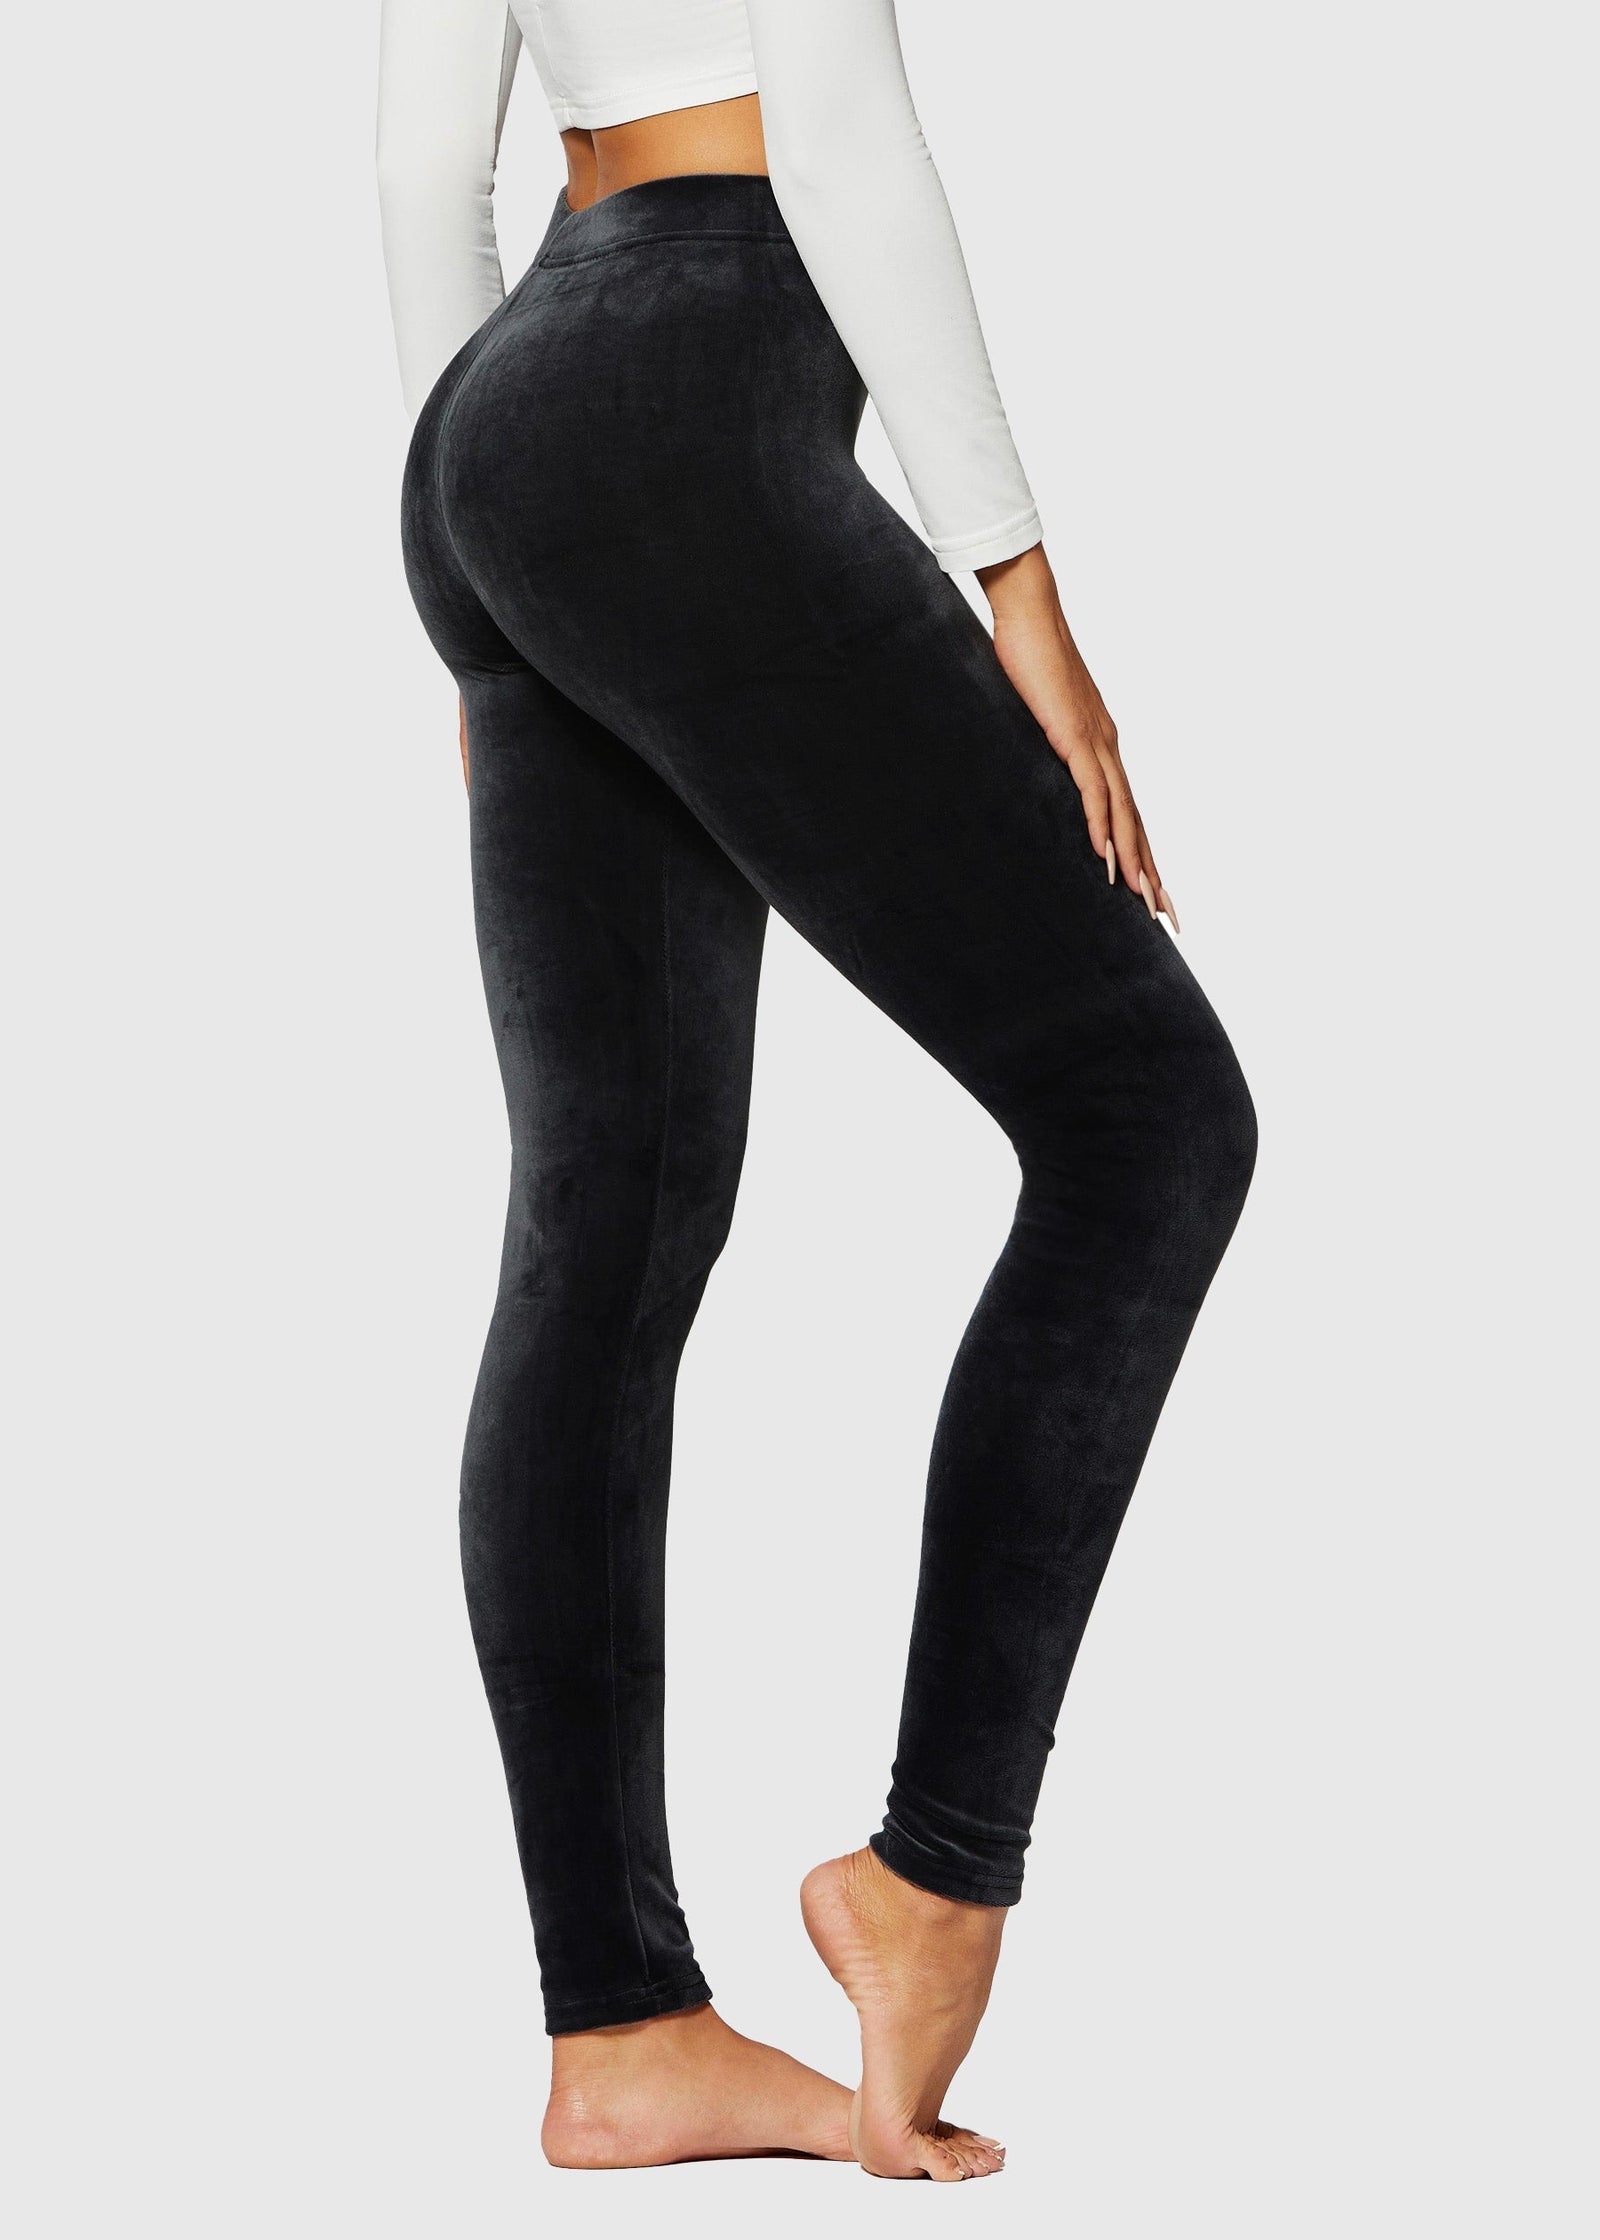 HSMQHJWE Conceited Dress Pants For Women Thick Leggings